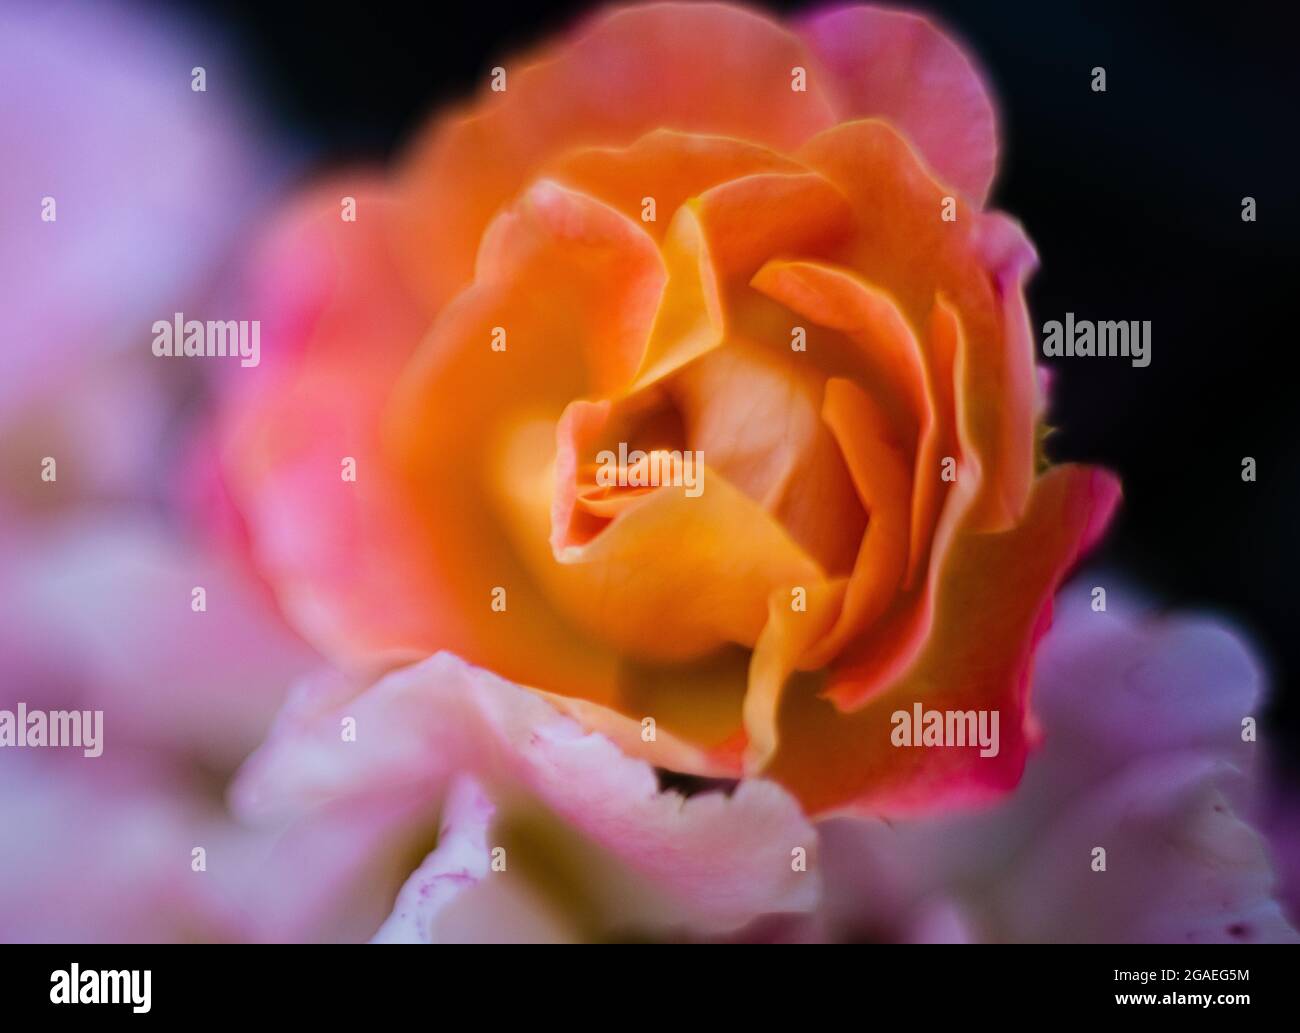 Soft focus picture of rose. Stock Photo